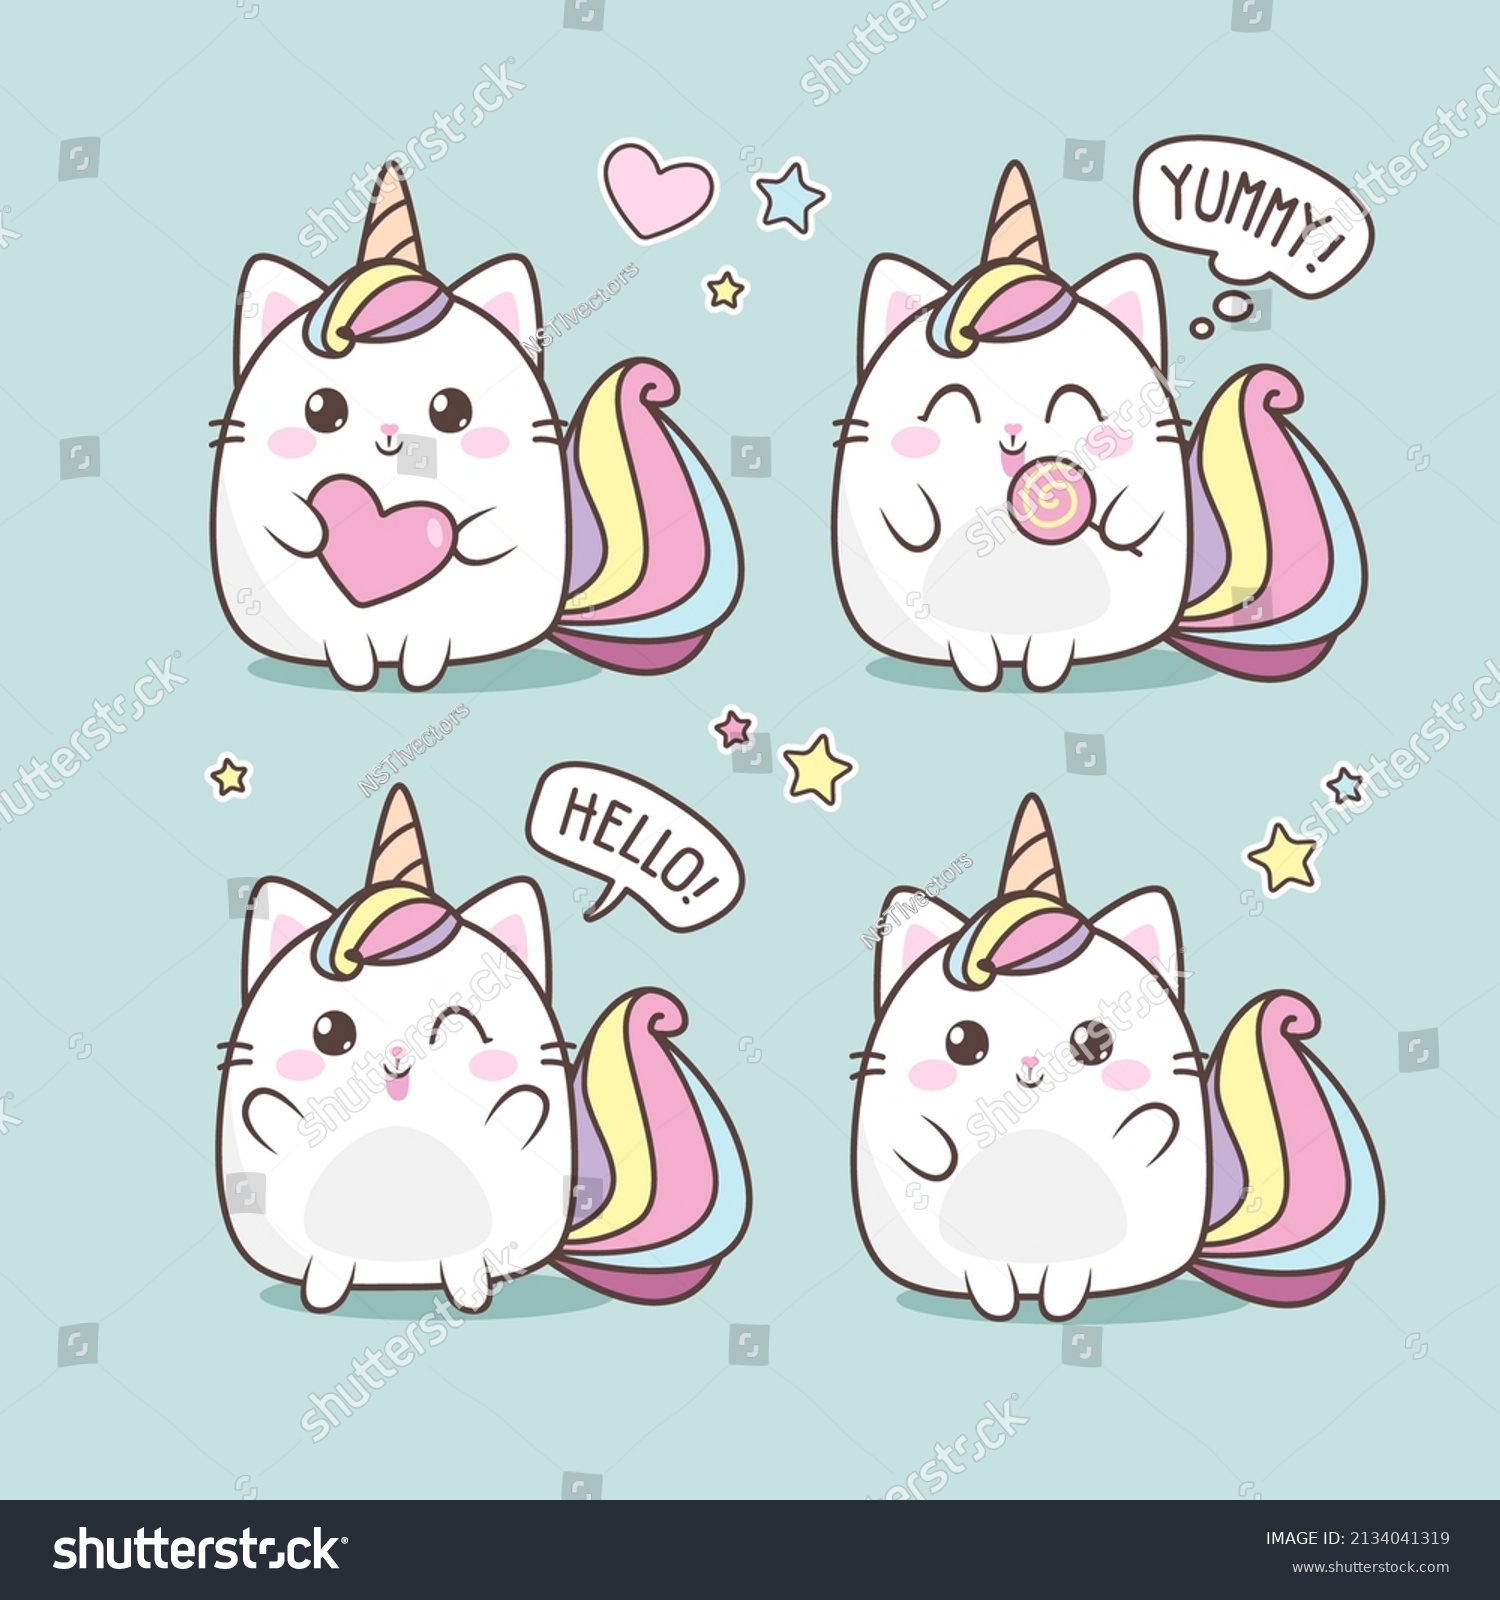 SVG of Cute Cat Caticorn or Kitten Unicorn set with rainbow and hearts. Vector Cat Unicorn with lollipop. Isolated vector illustration for kids design prints, posters, t-shirts, stickers svg